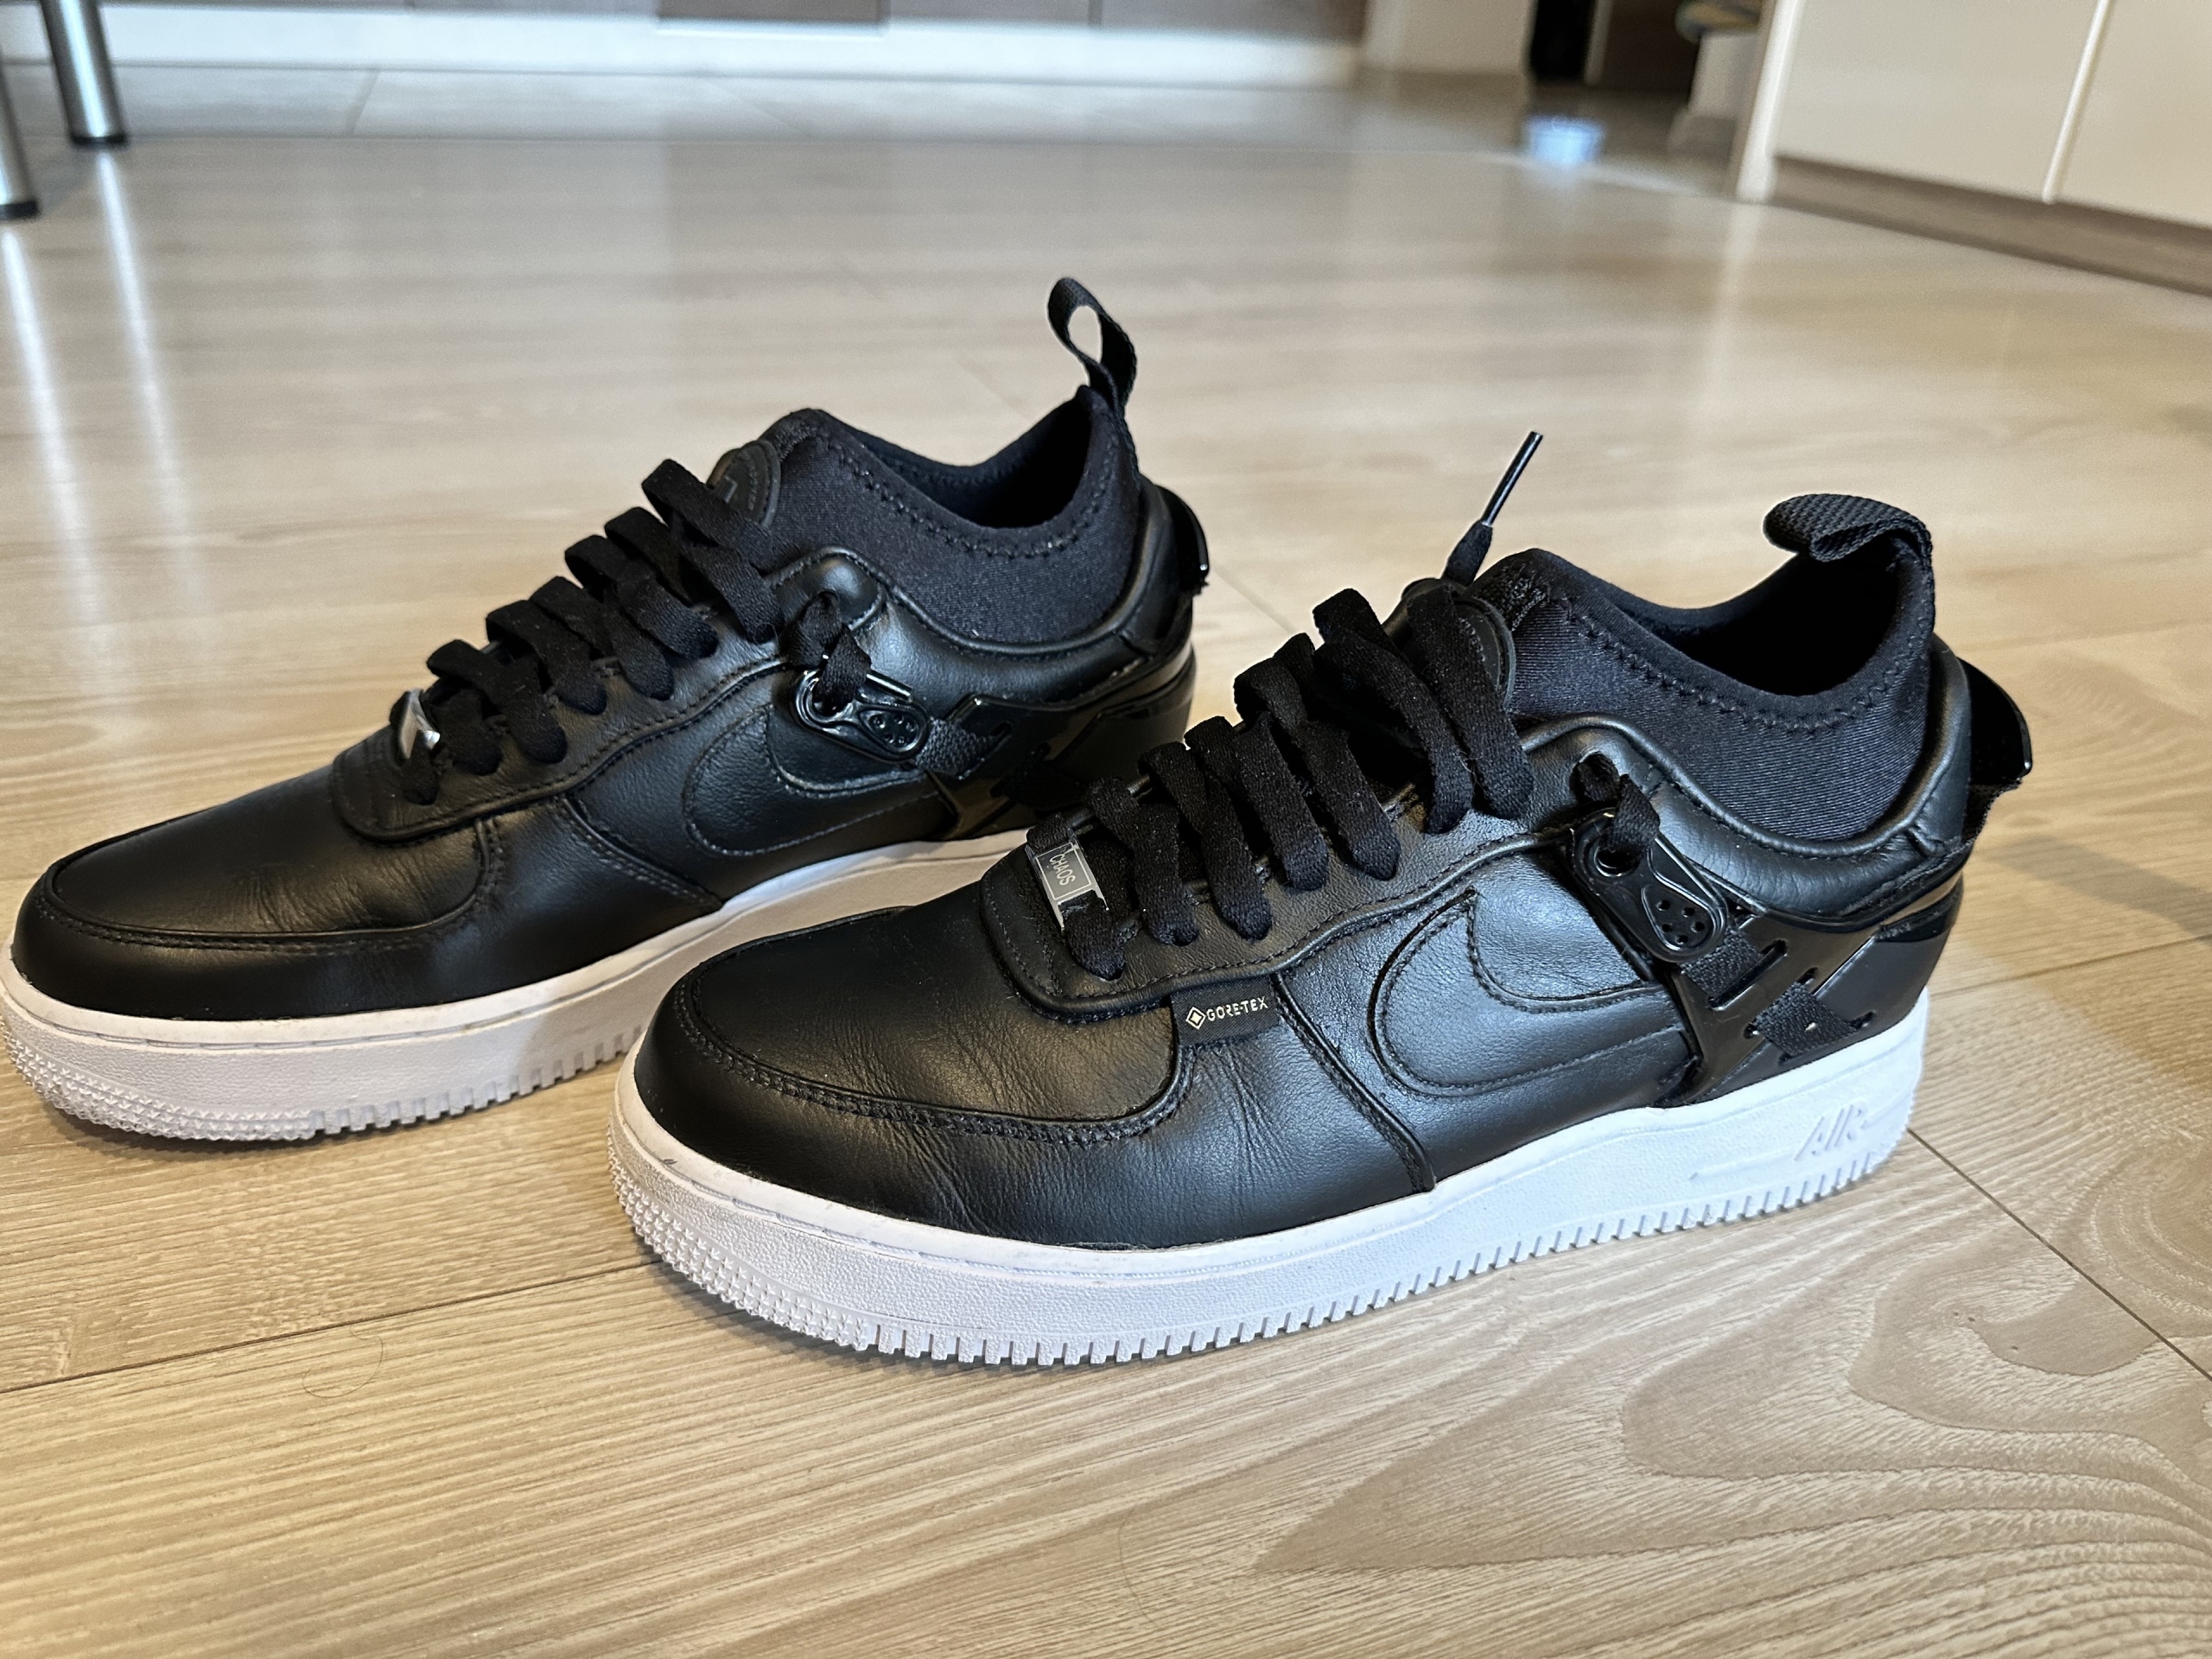 Nike Air Force 1 low SP x undercover   Opole   Licytacja na